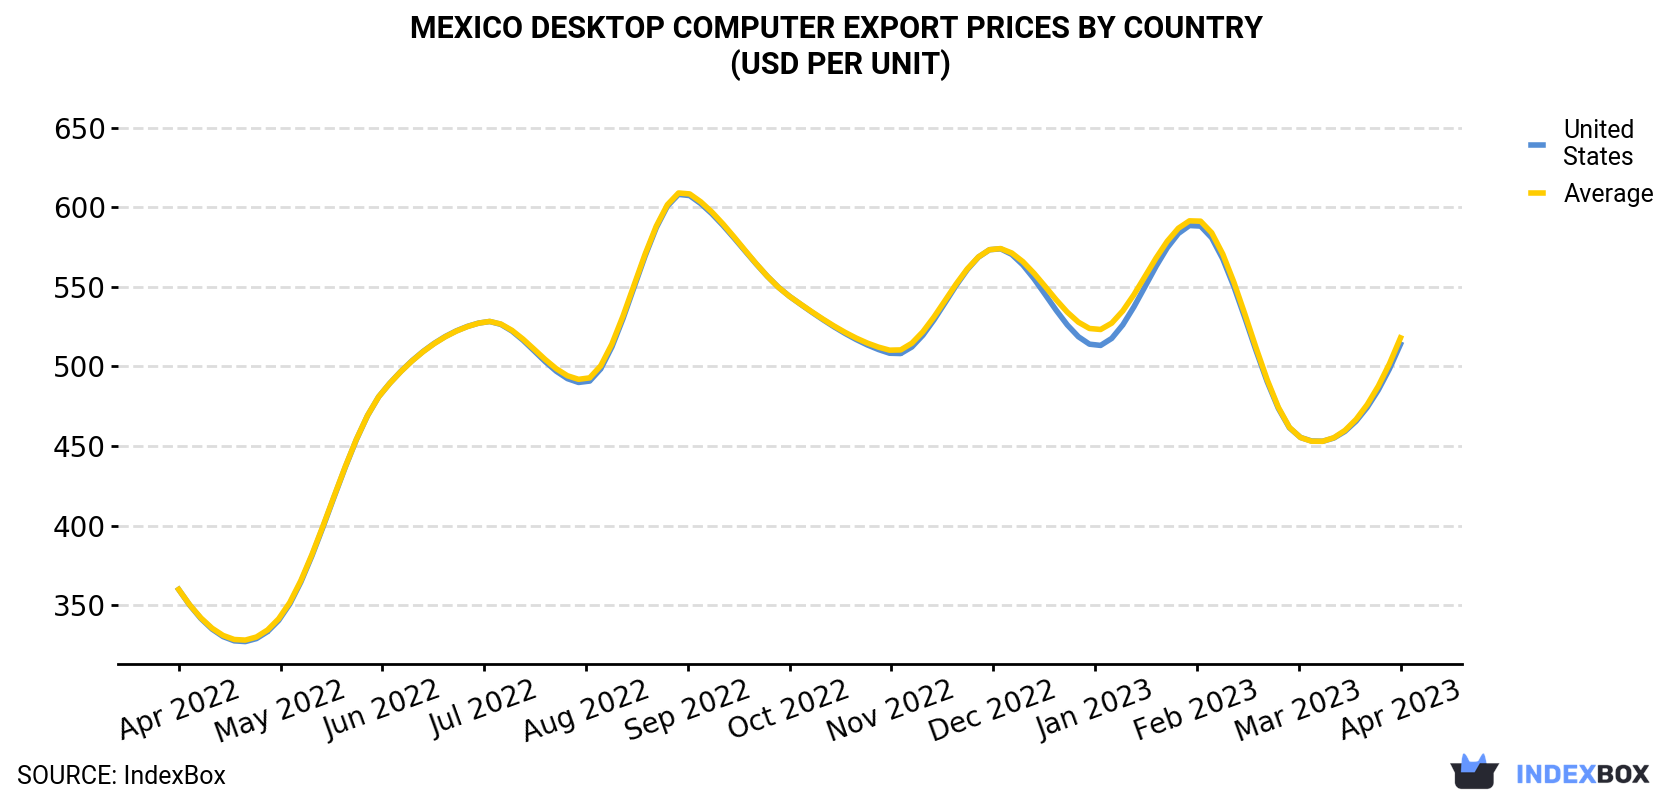 Mexico Desktop Computer Export Prices By Country (USD Per Unit)